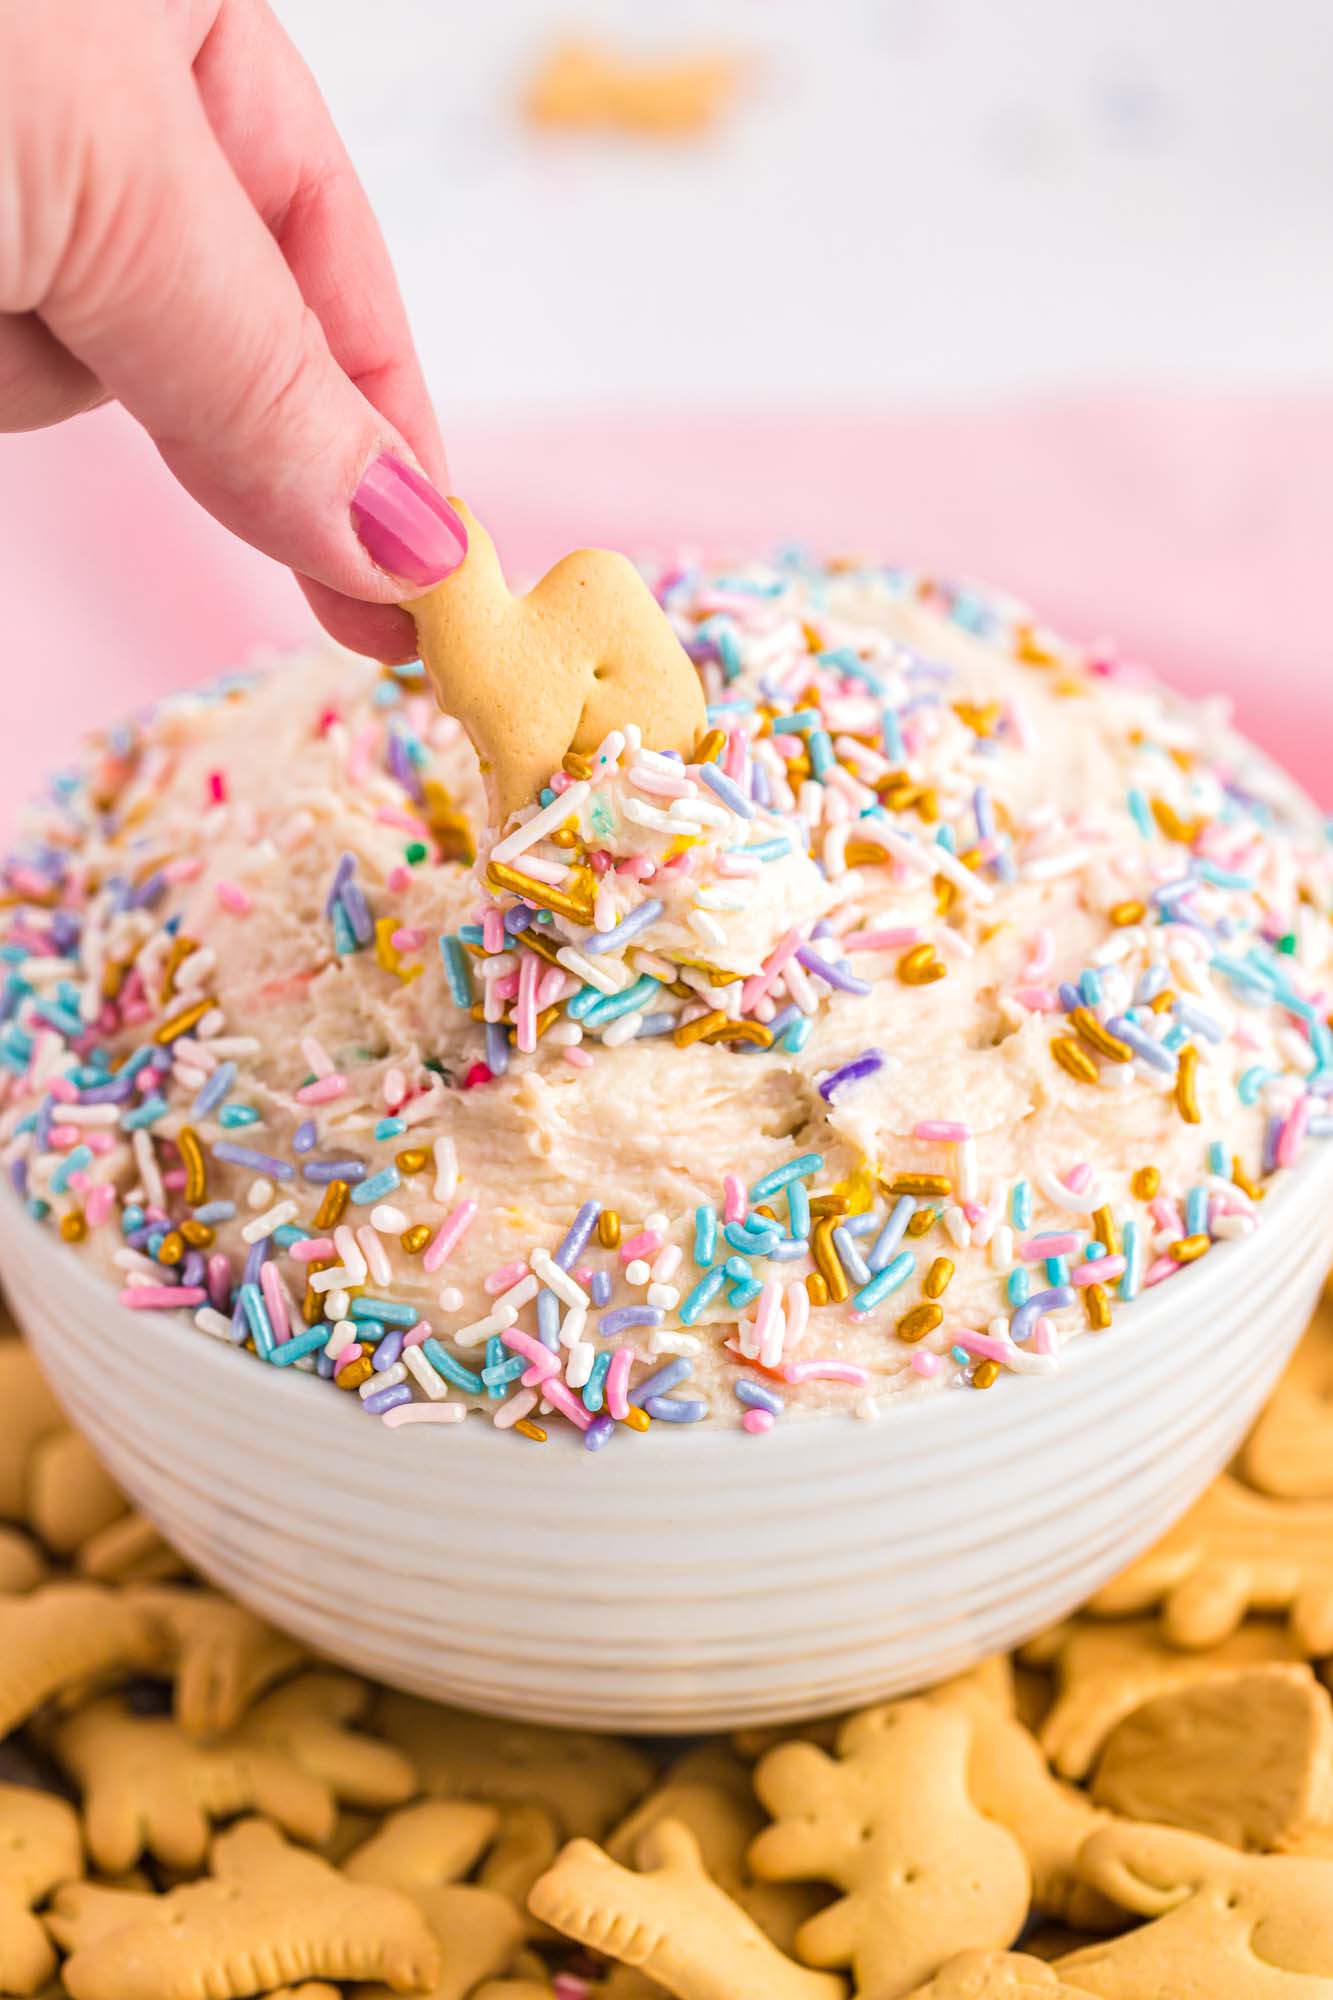 Dipping animal cracker into funfetti cake batter dip, decorated with sprinkles and served with animal crackers.